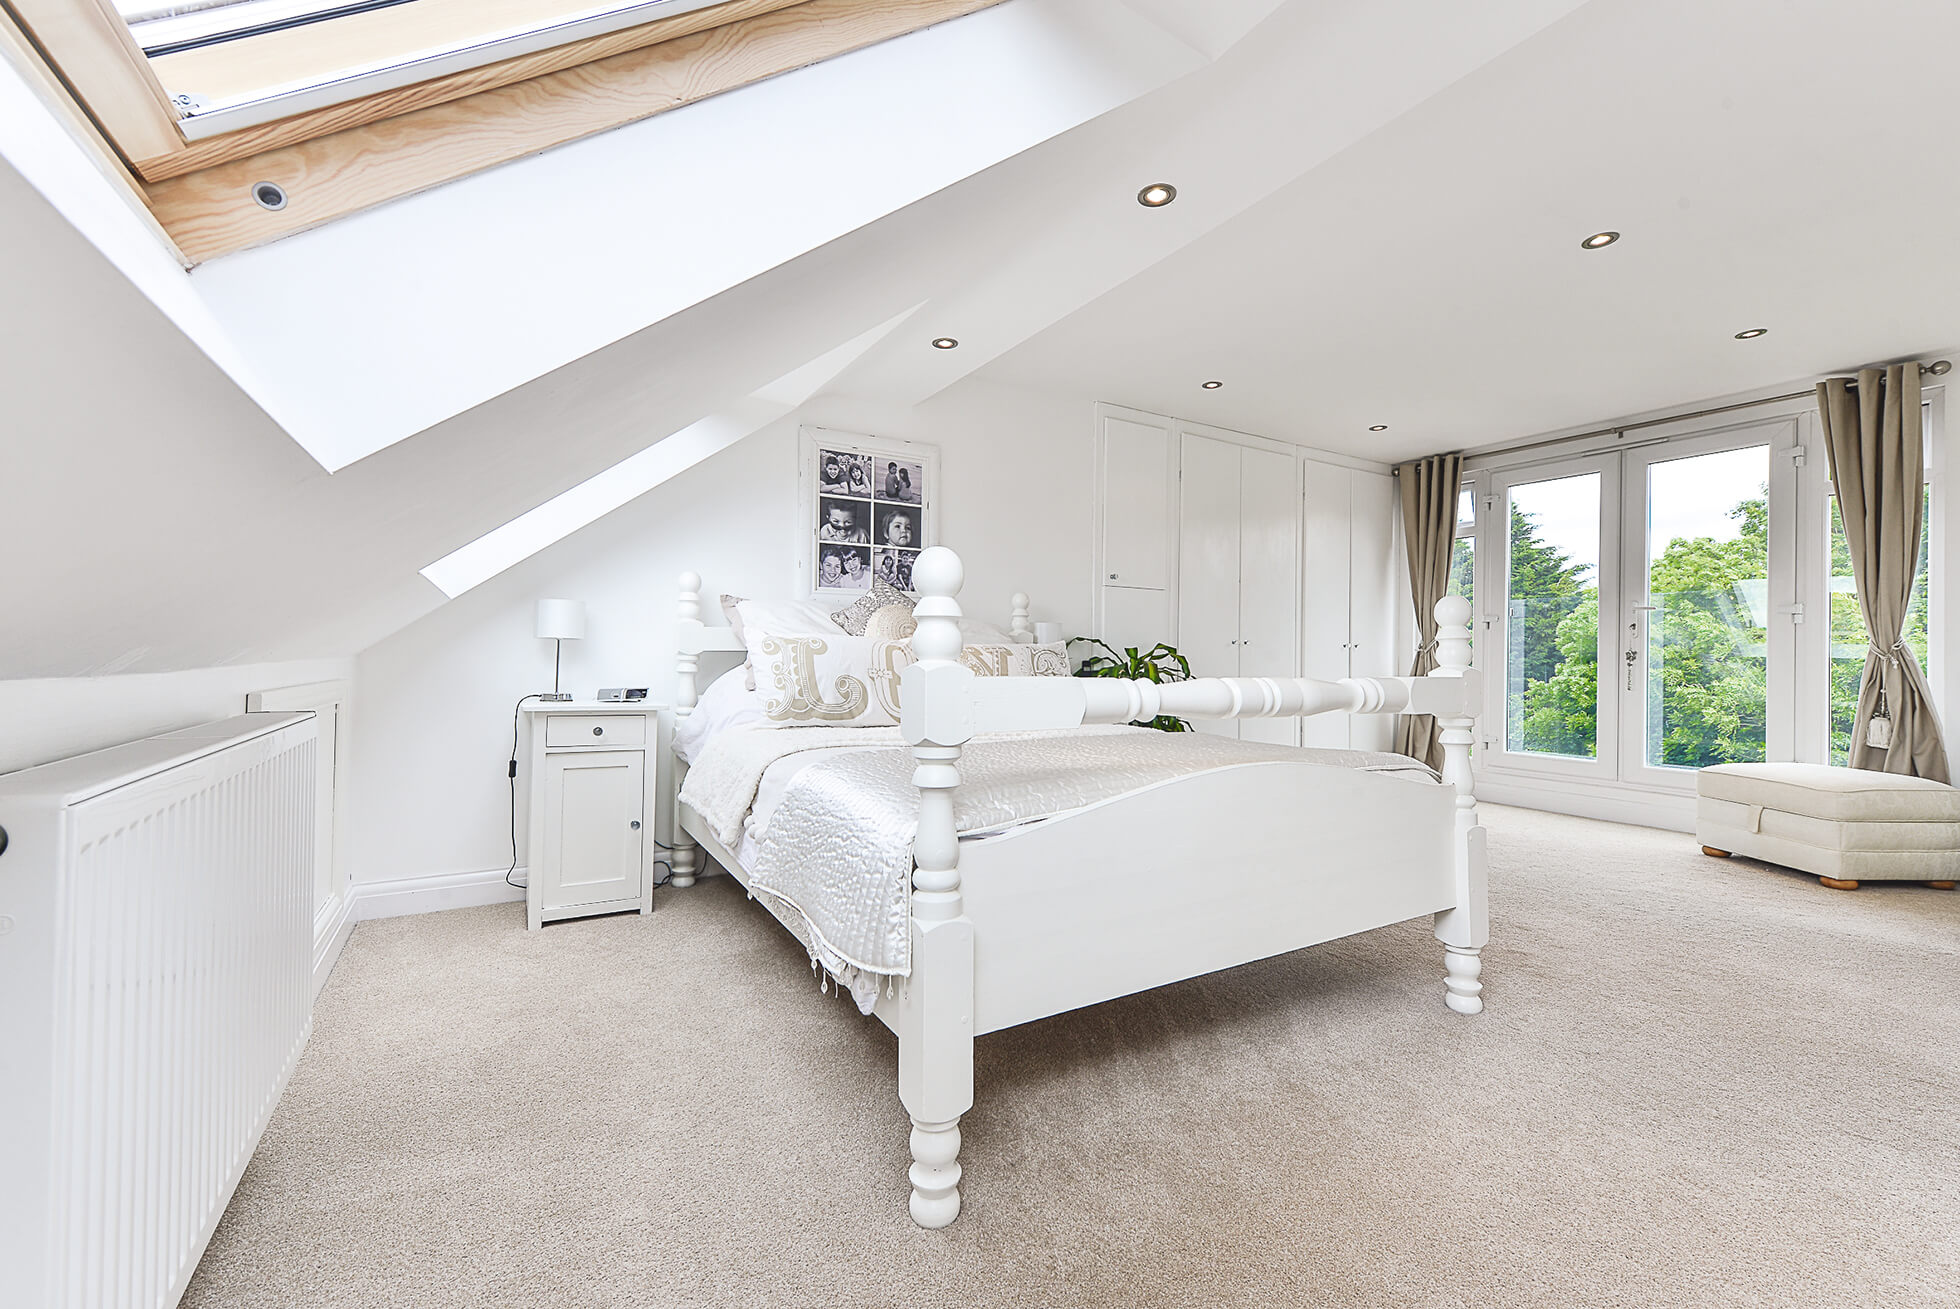 Do you have a question about converting your Loft in Aston End? Here are the most popular questions asked by our clients.